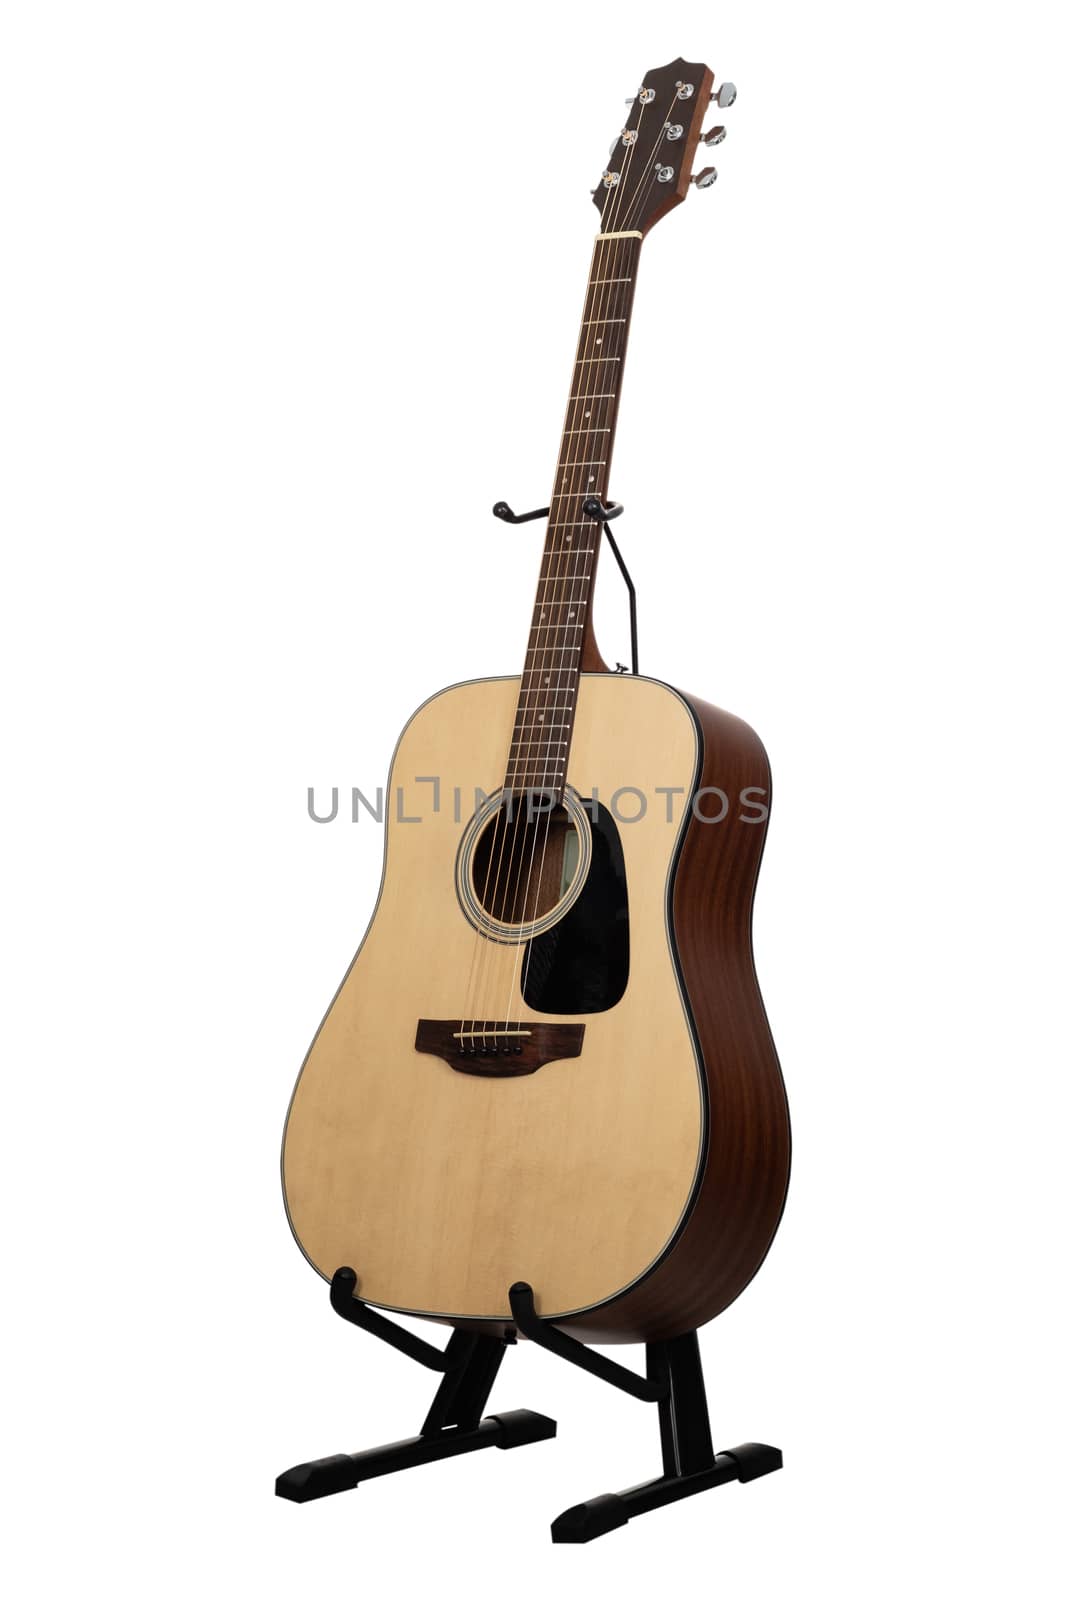 Standing Guitar on white background.